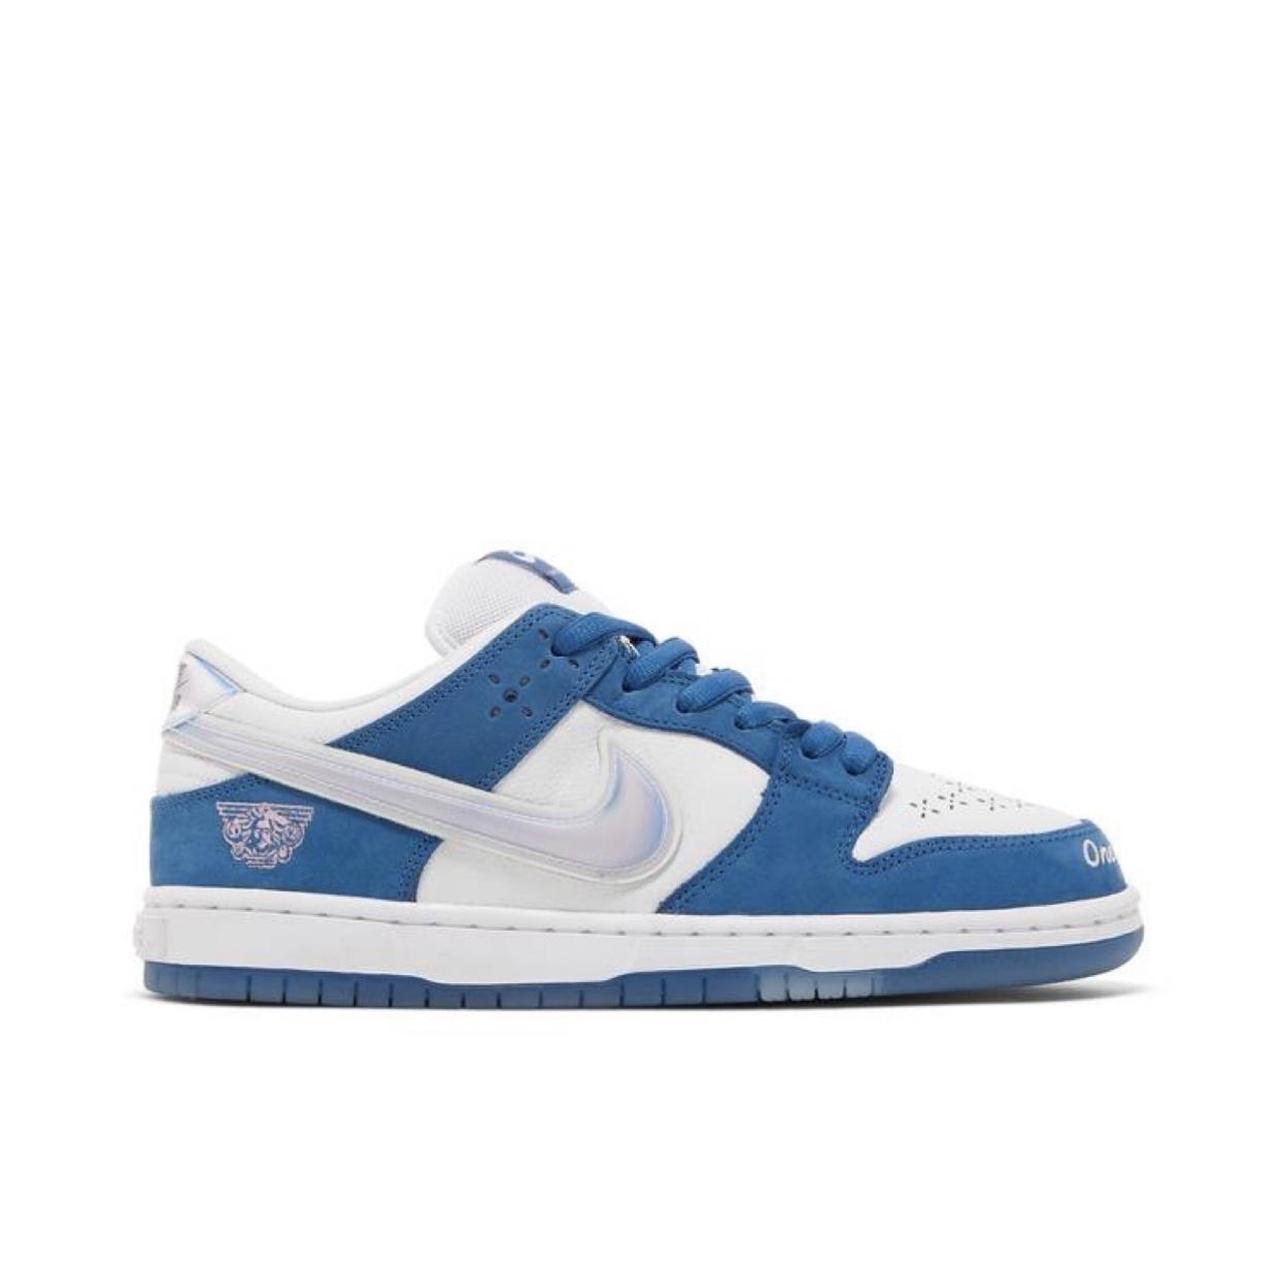 Dodger Blue Covers This New Nike SB Dunk Low